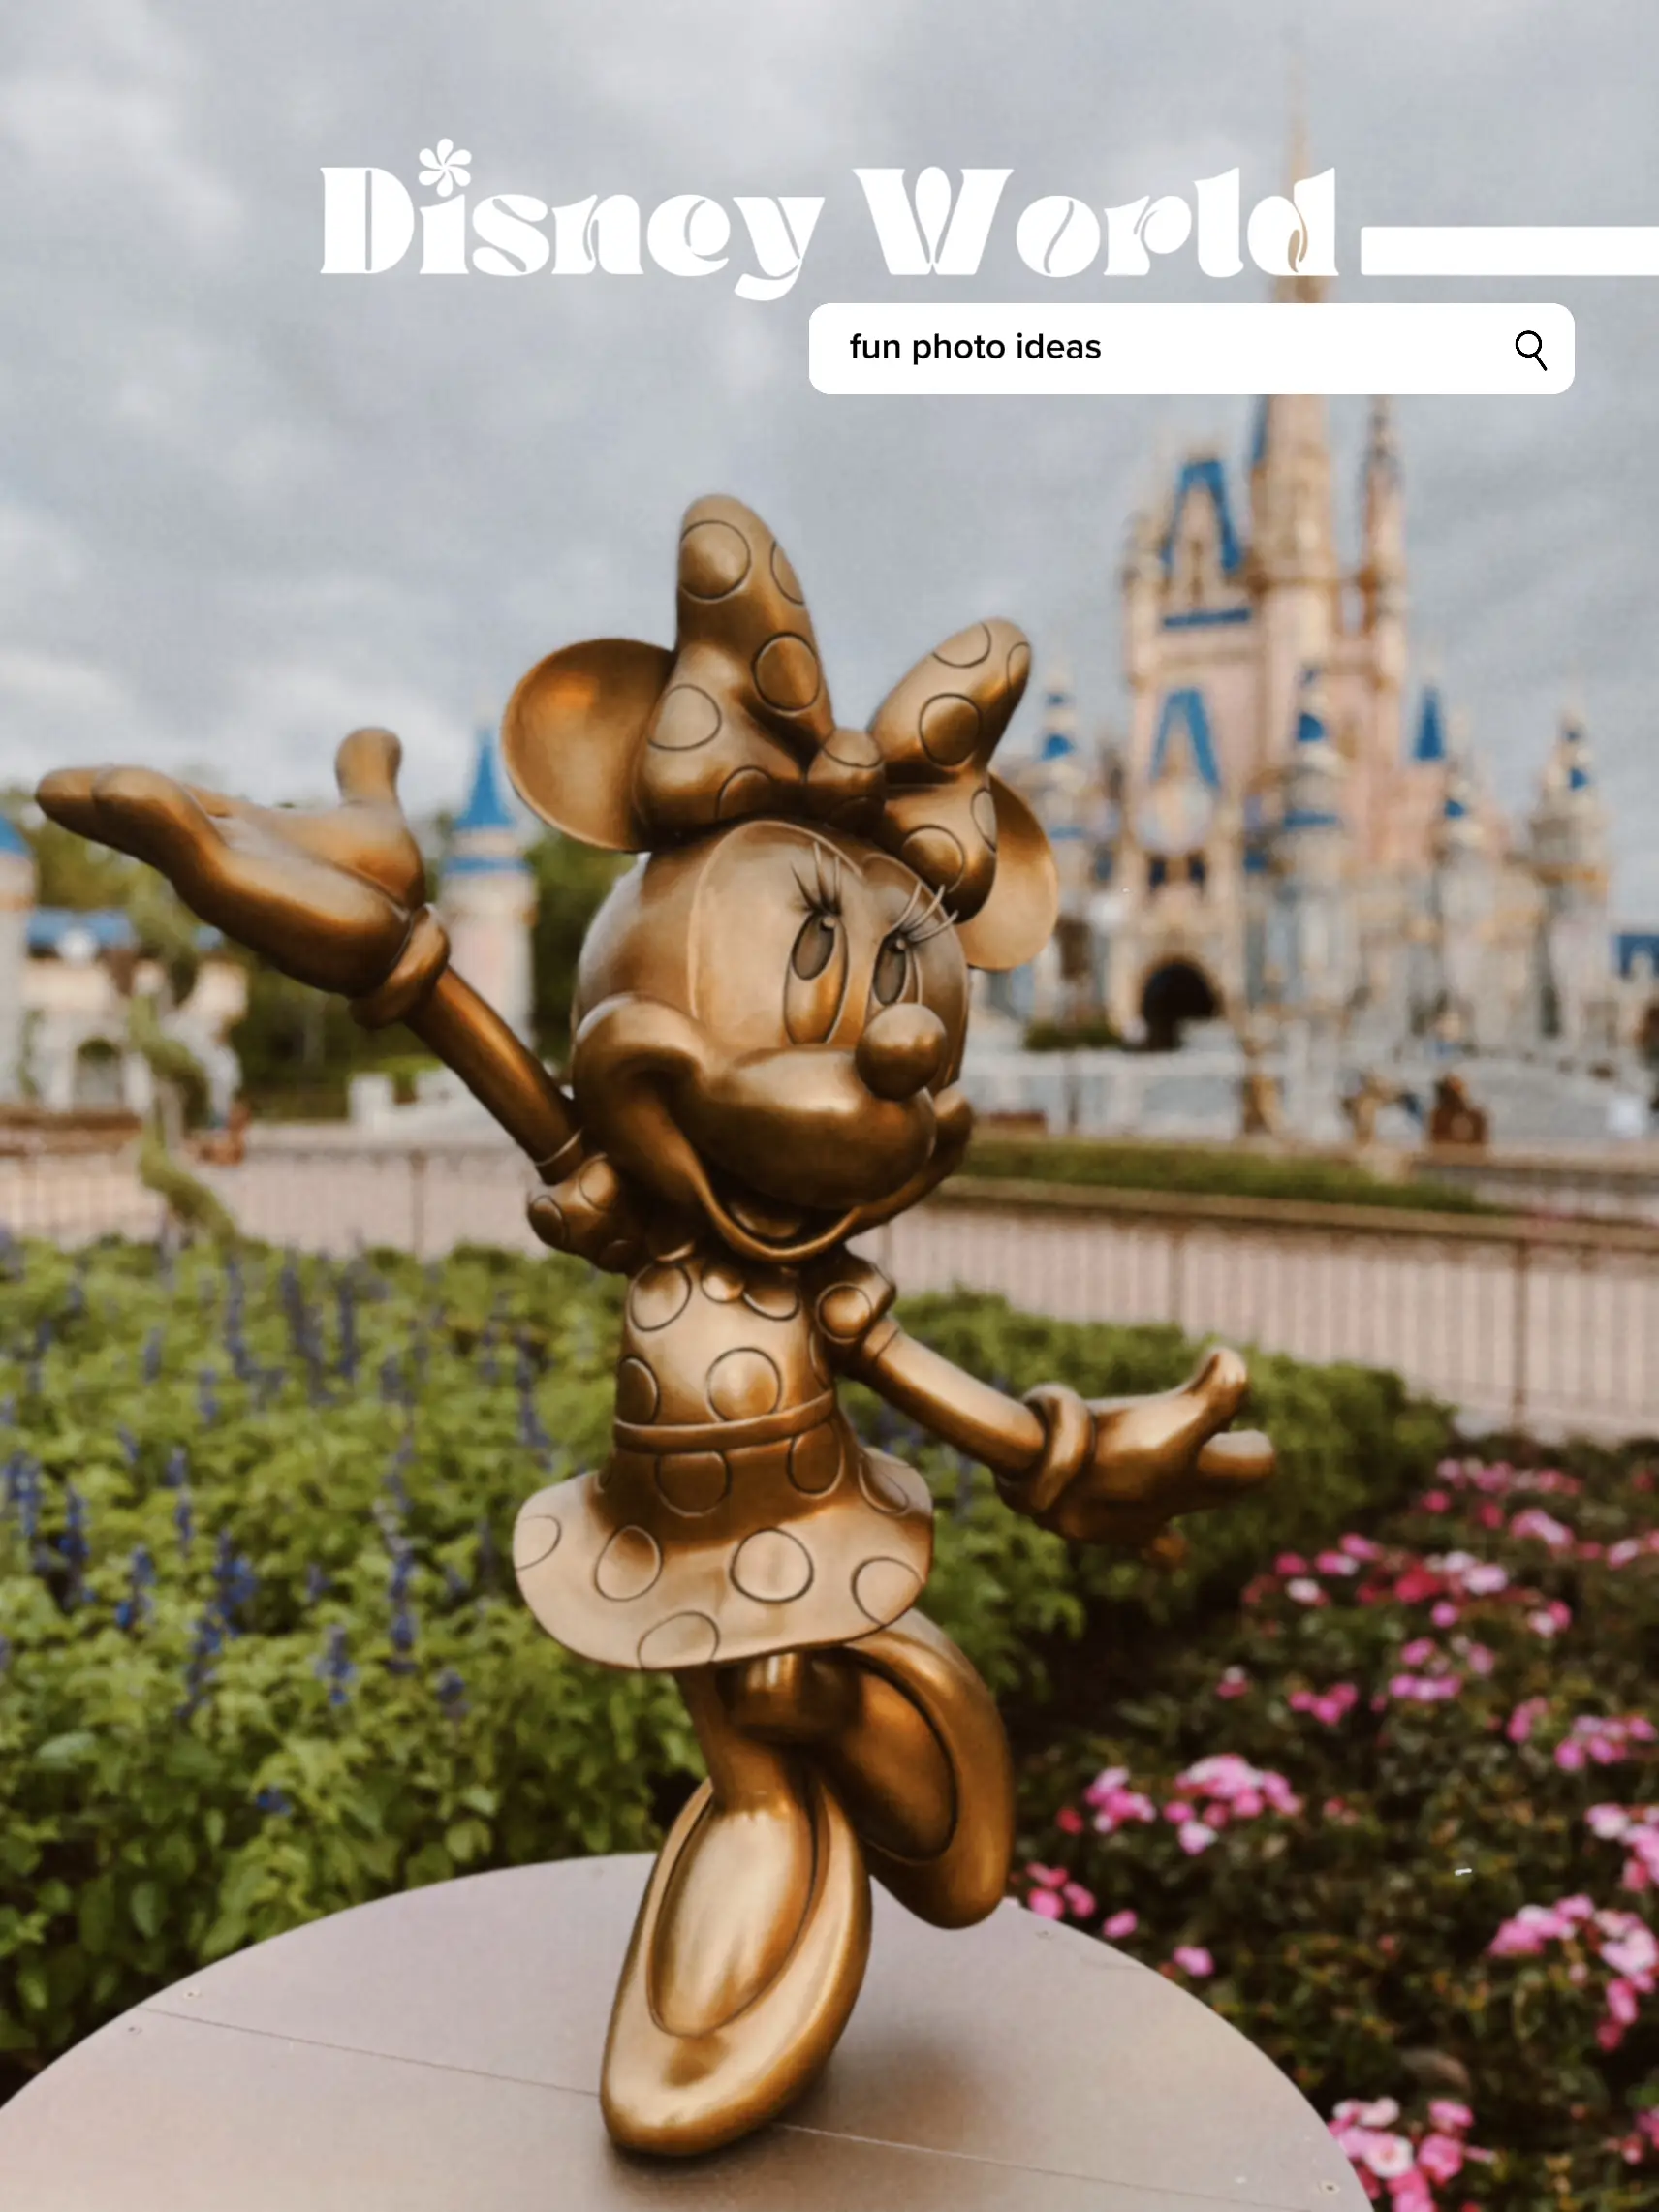  A statue of Mickey Mouse in front of a castle.